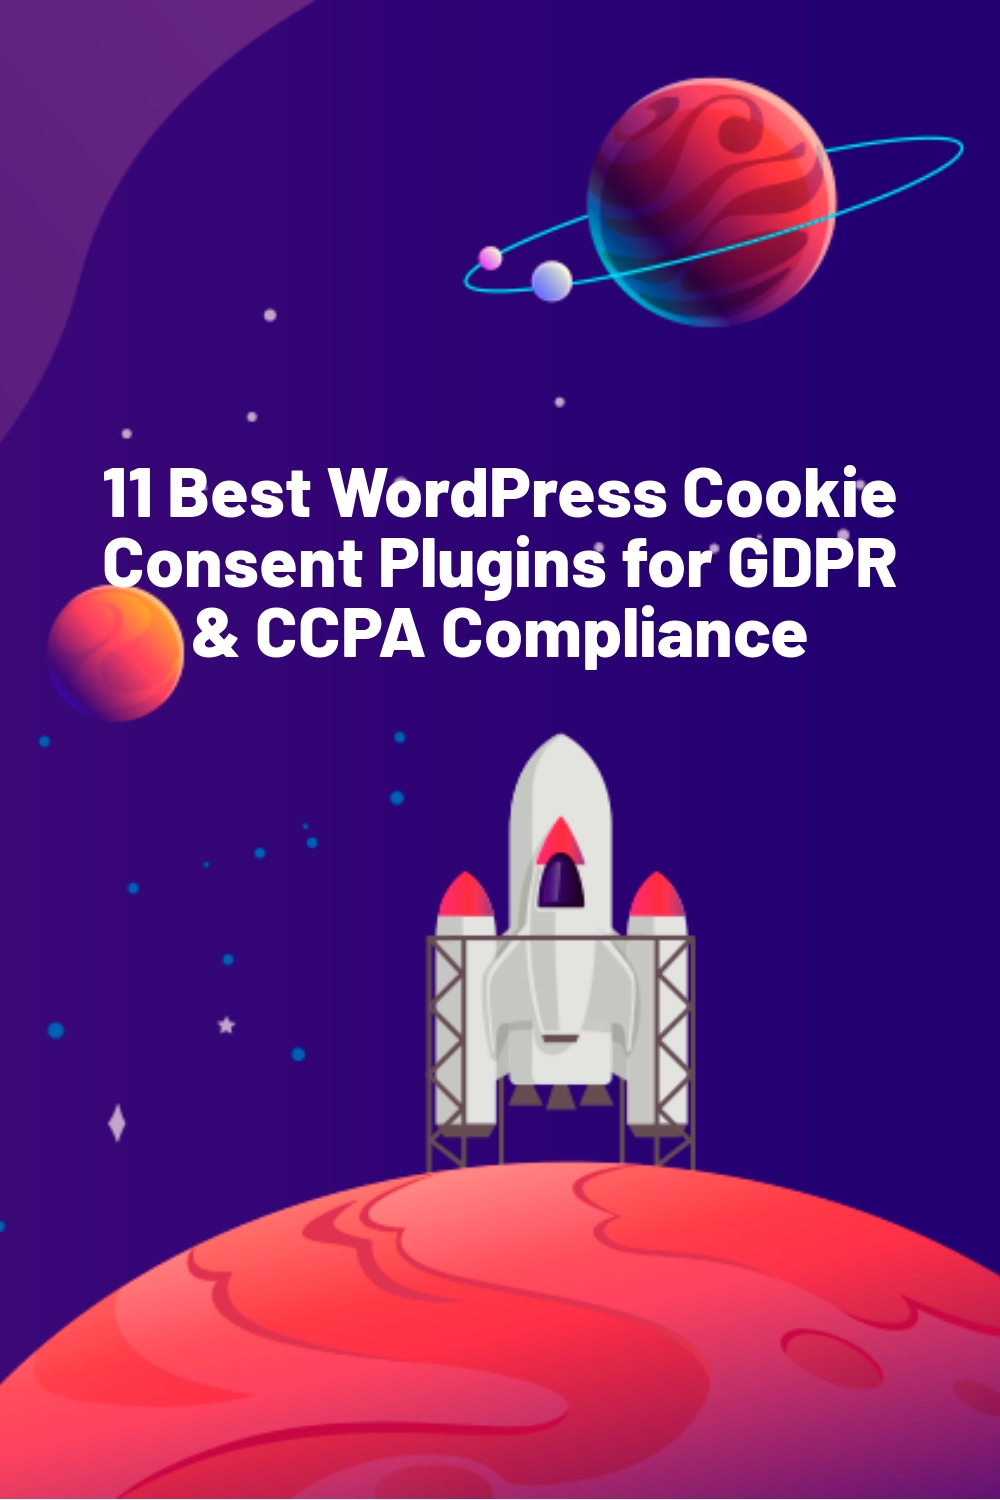 11 Best WordPress Cookie Consent Plugins for GDPR & CCPA Compliance